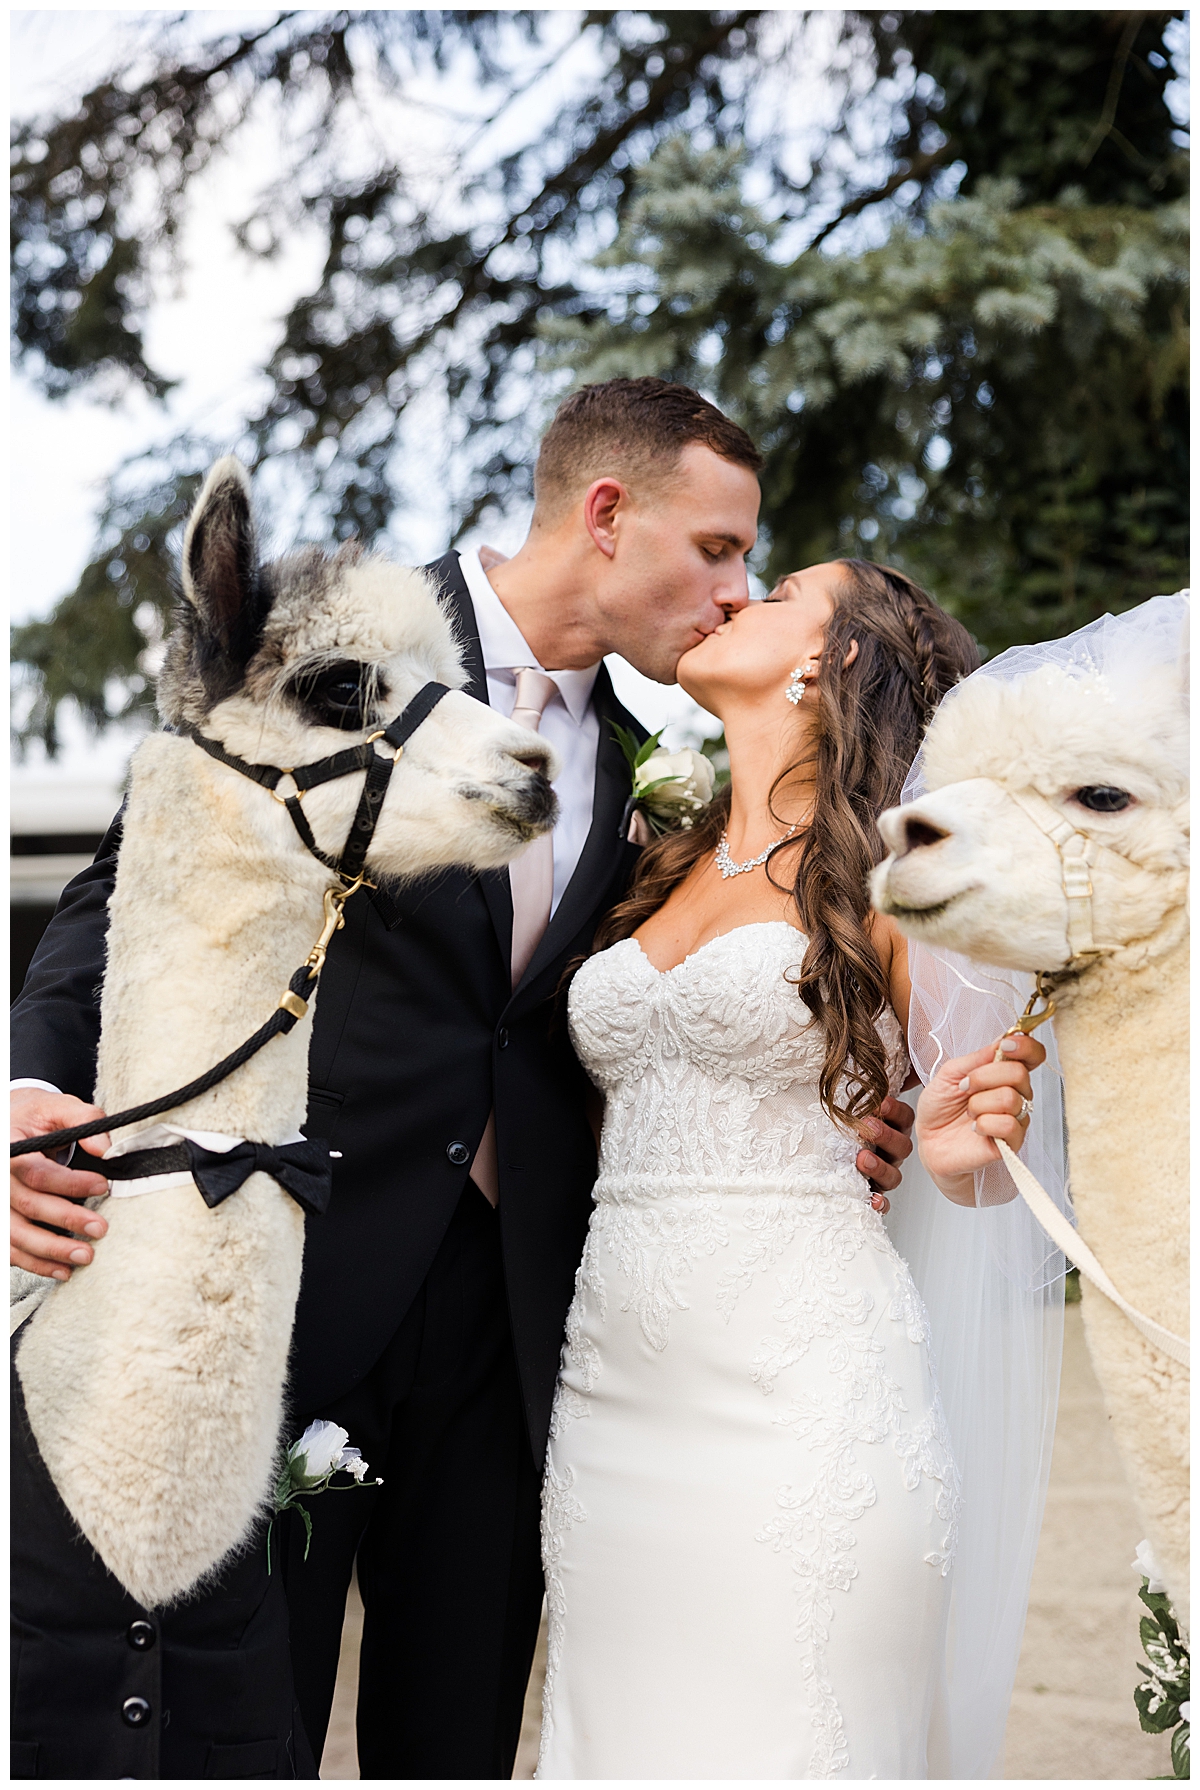 Bride and groom with llamas on wedding day